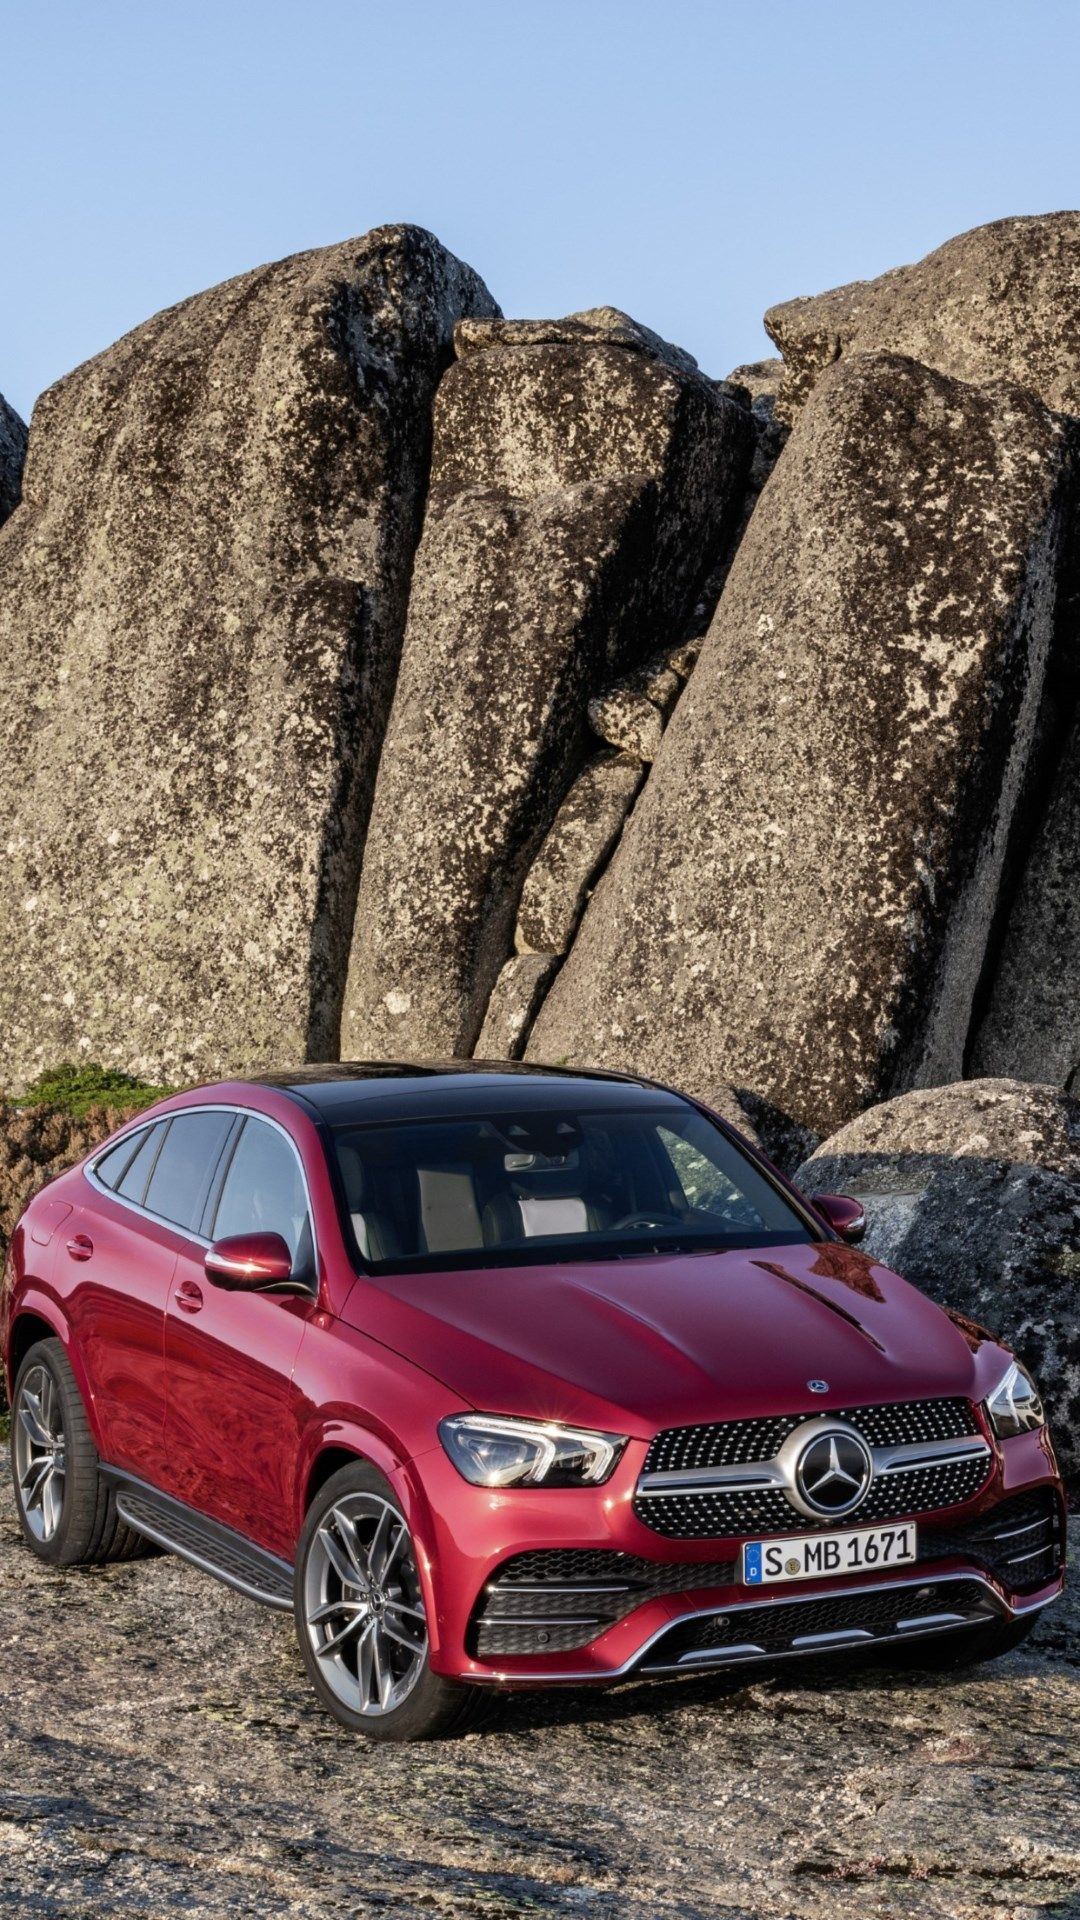 Download wallpaper: Mercedes Benz GLE AMG Coupe 1080x1920